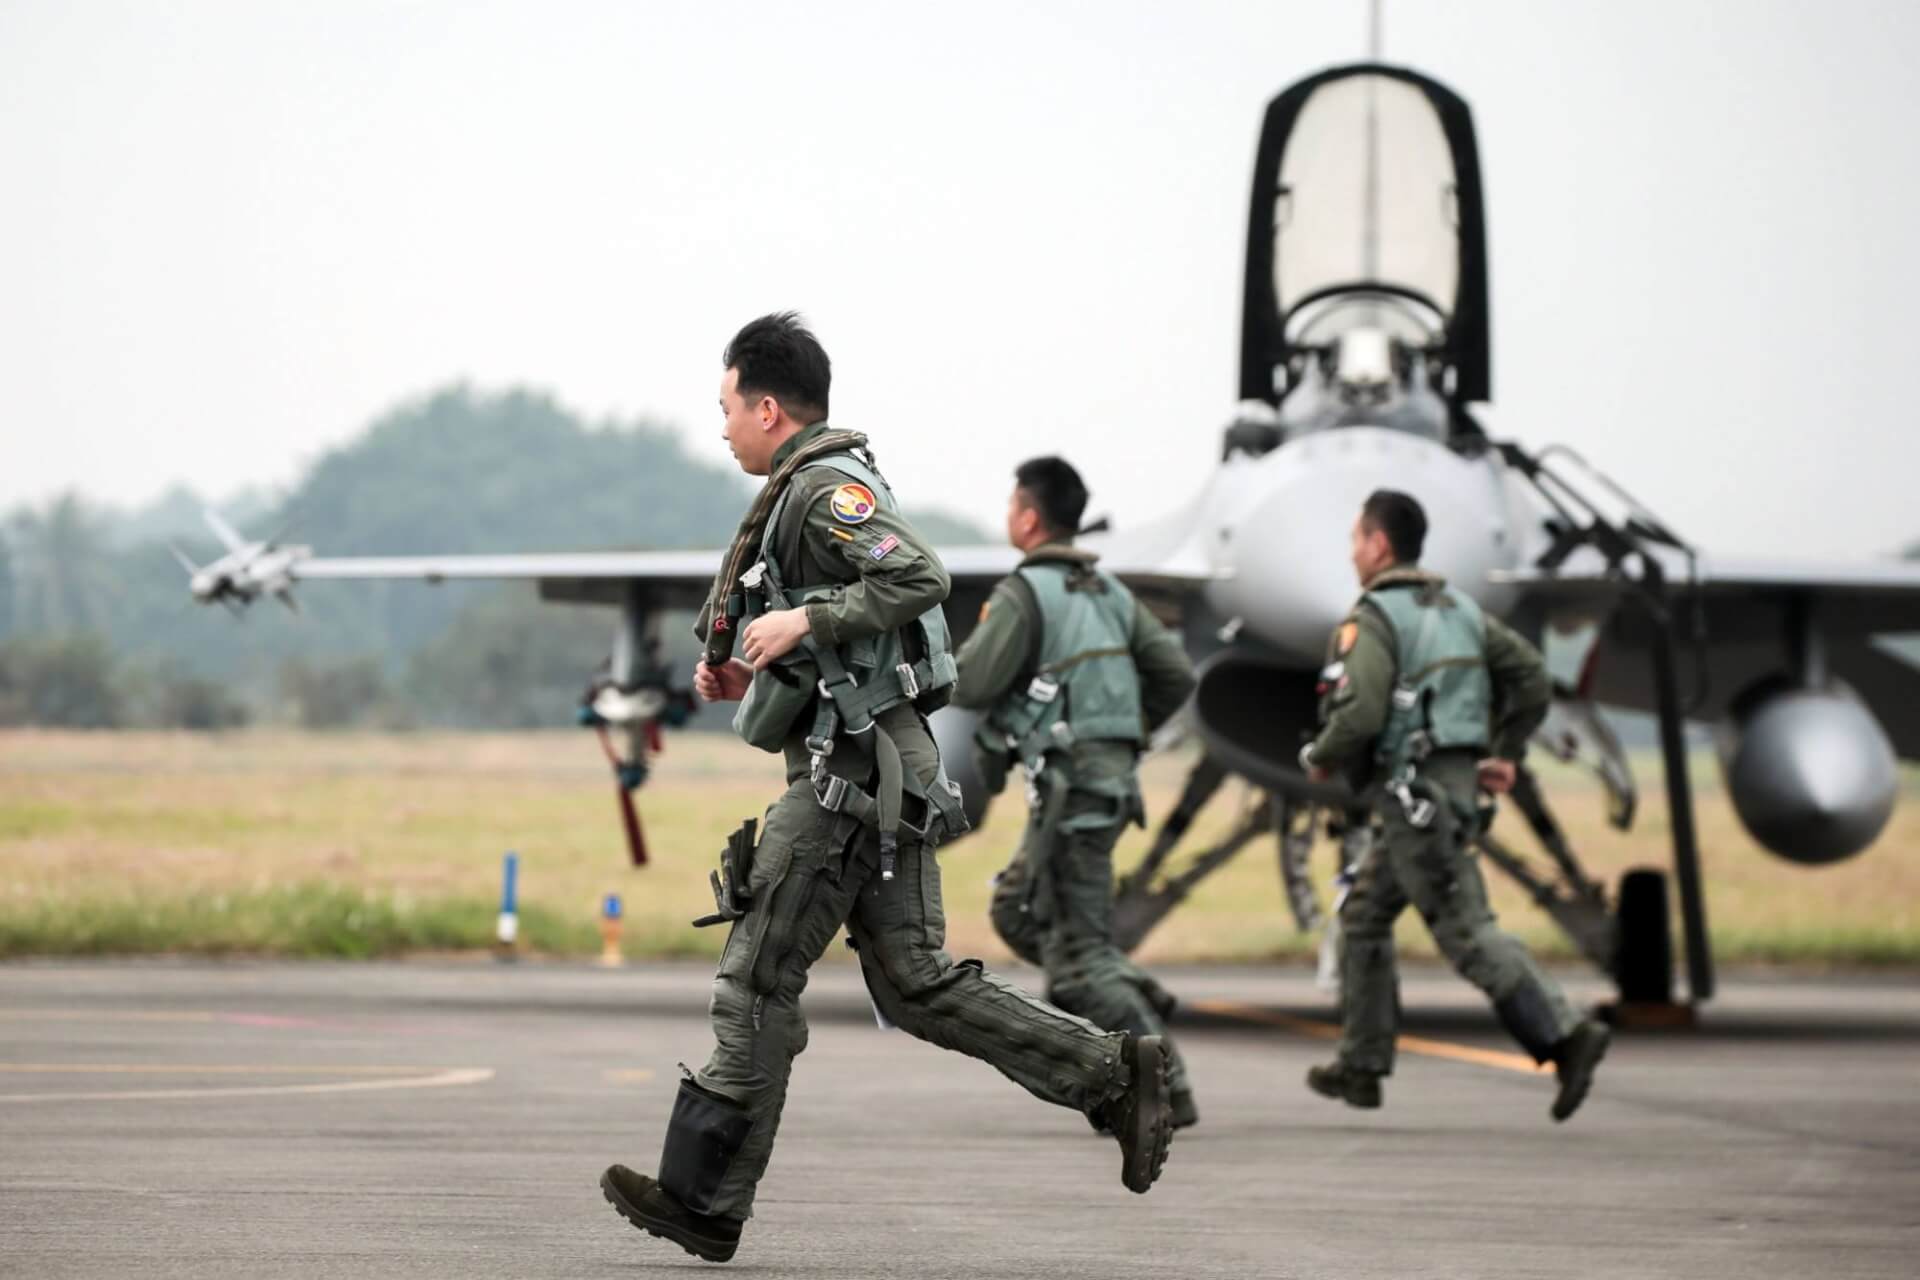 China Enlisted Western Pilots to Prepare for Possible War With US